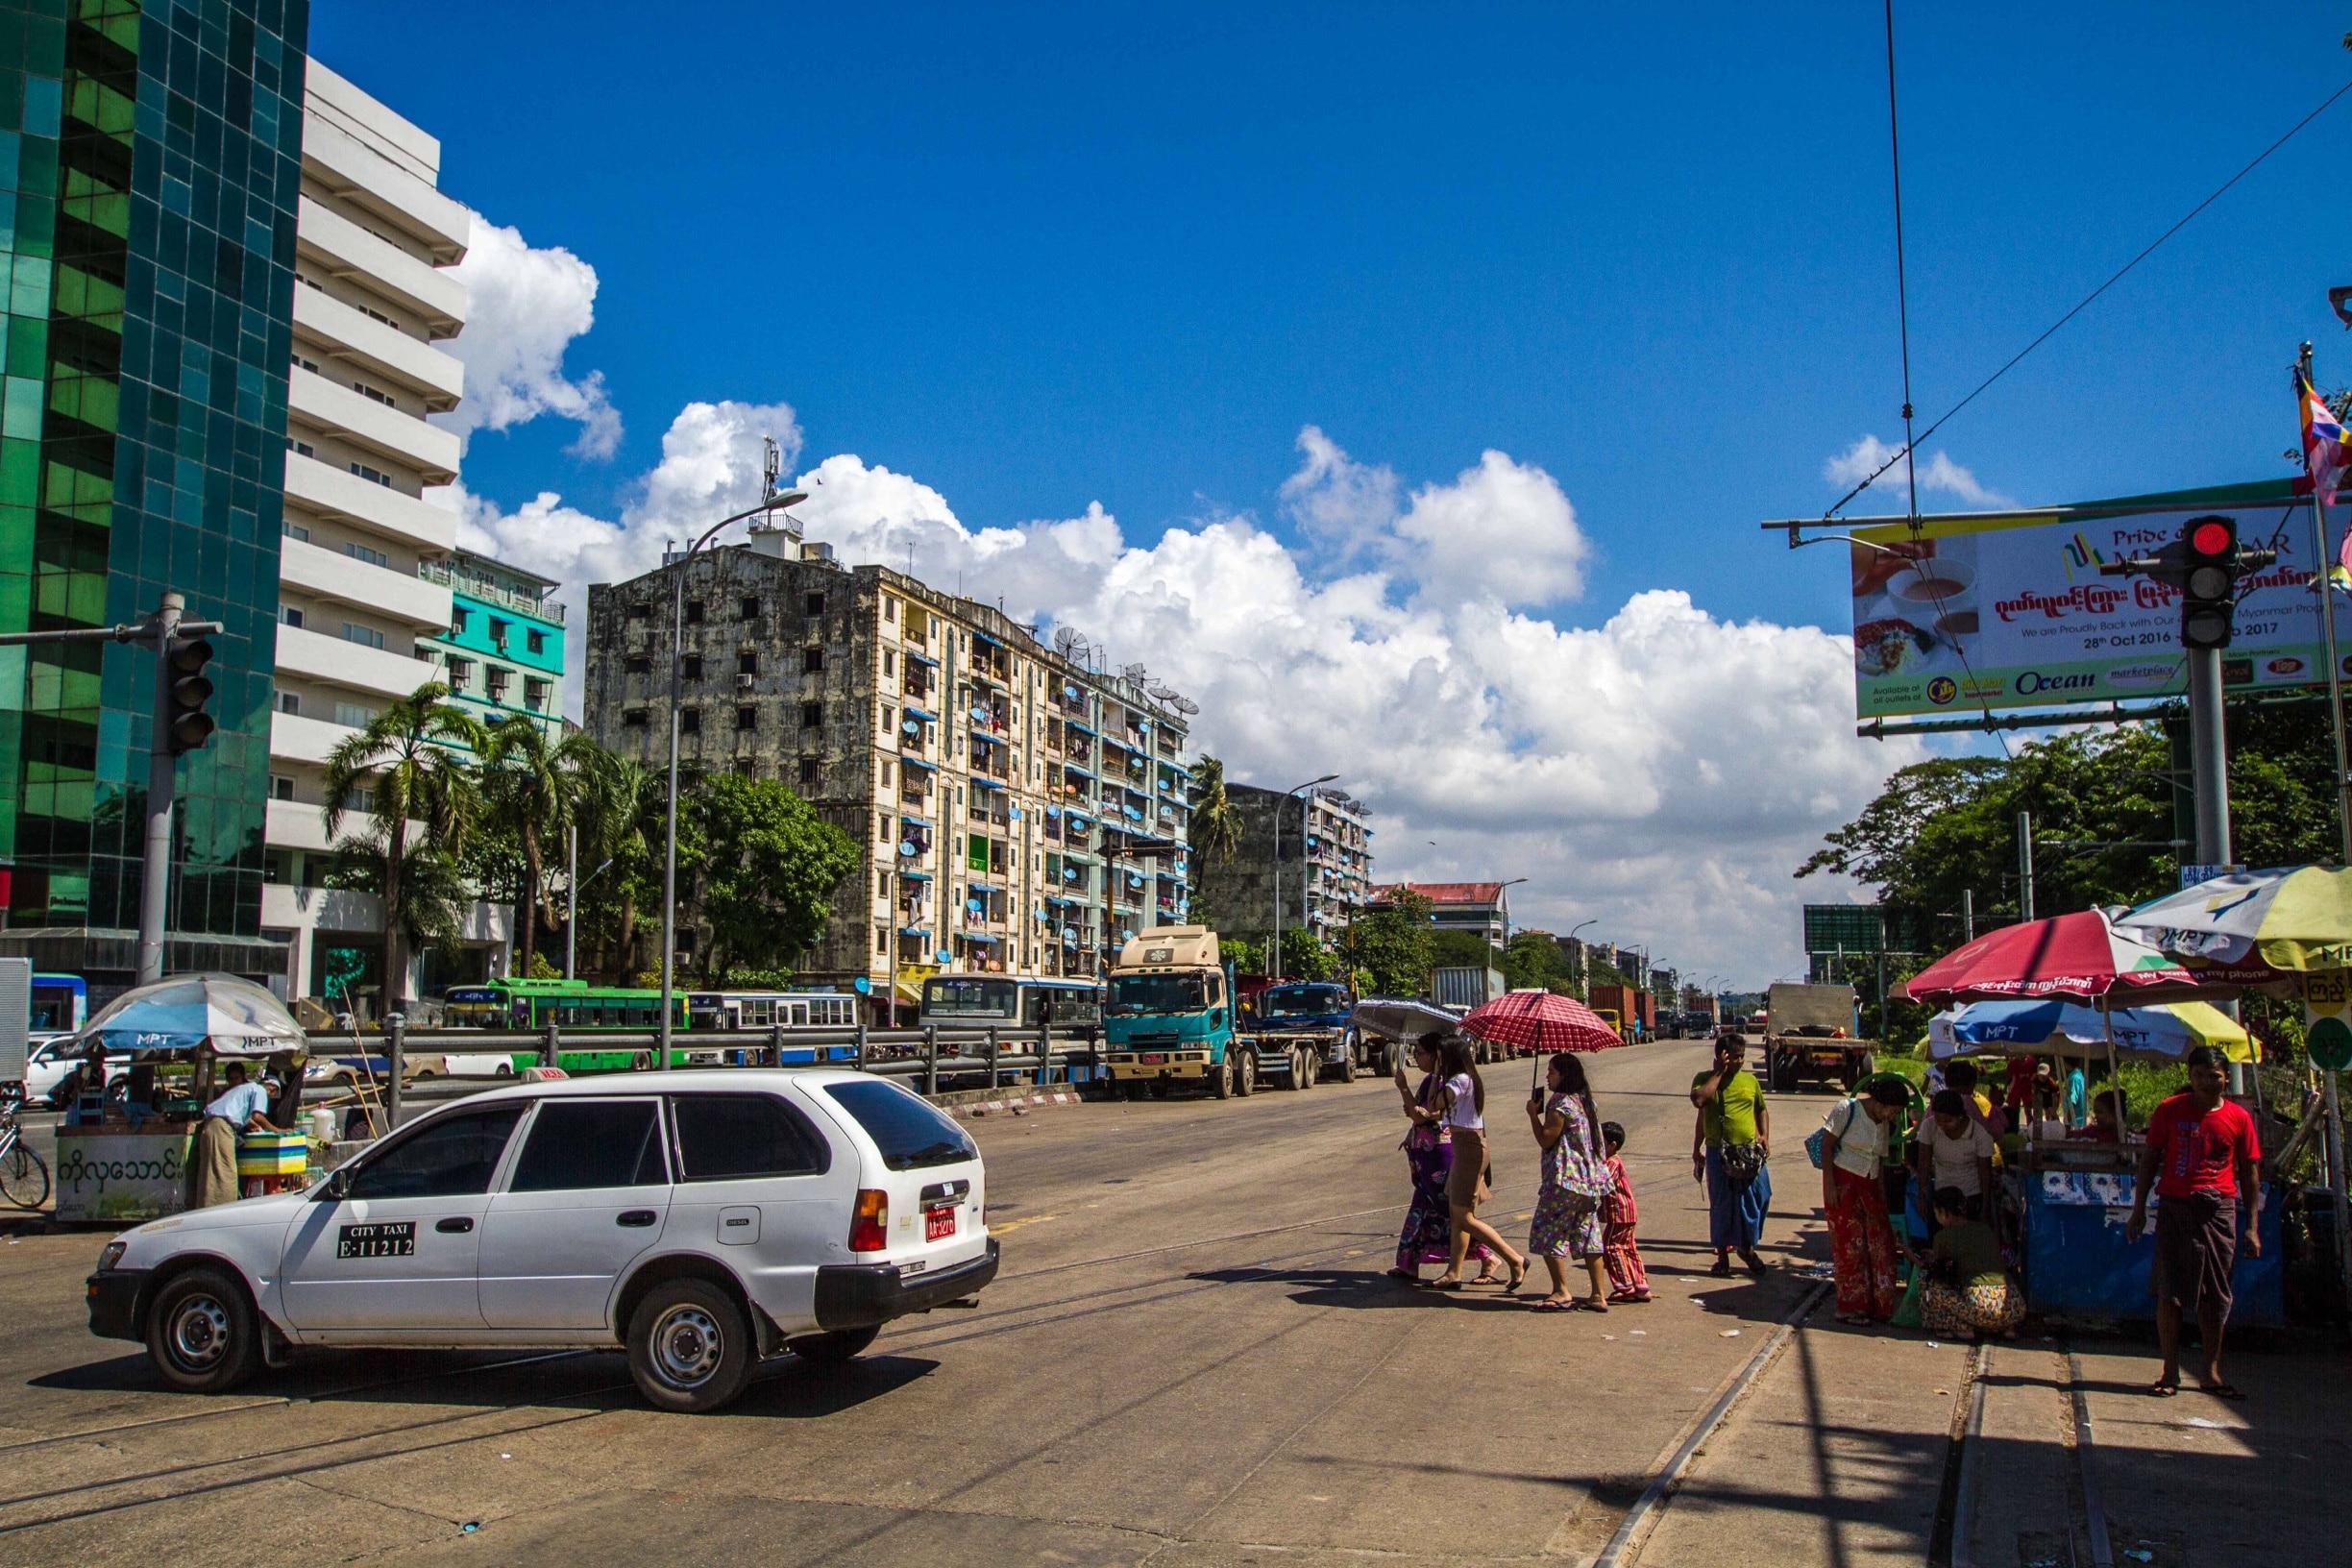 The streets of Yangon, particularly near Botataung Pagoda, show a fascinating collision of local traditions, colonial history and modern advancement